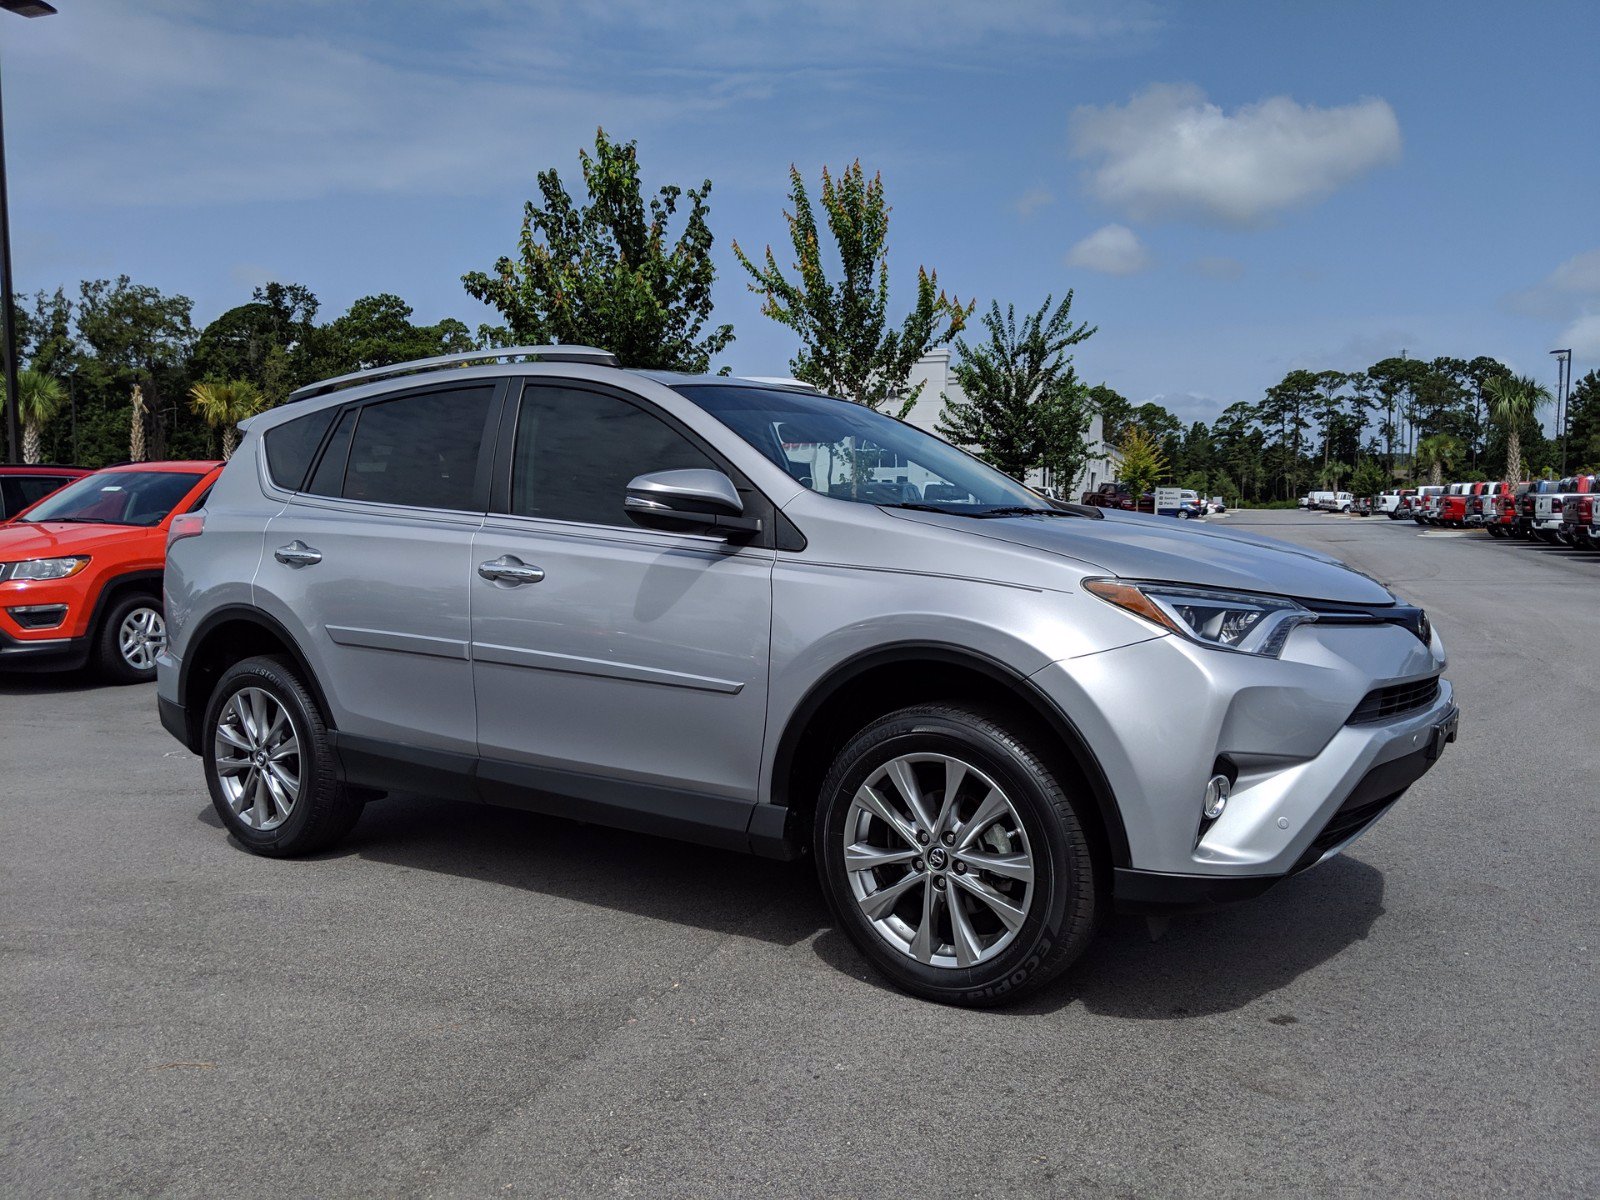 PreOwned 2016 Toyota RAV4 Limited 4D Sport Utility in